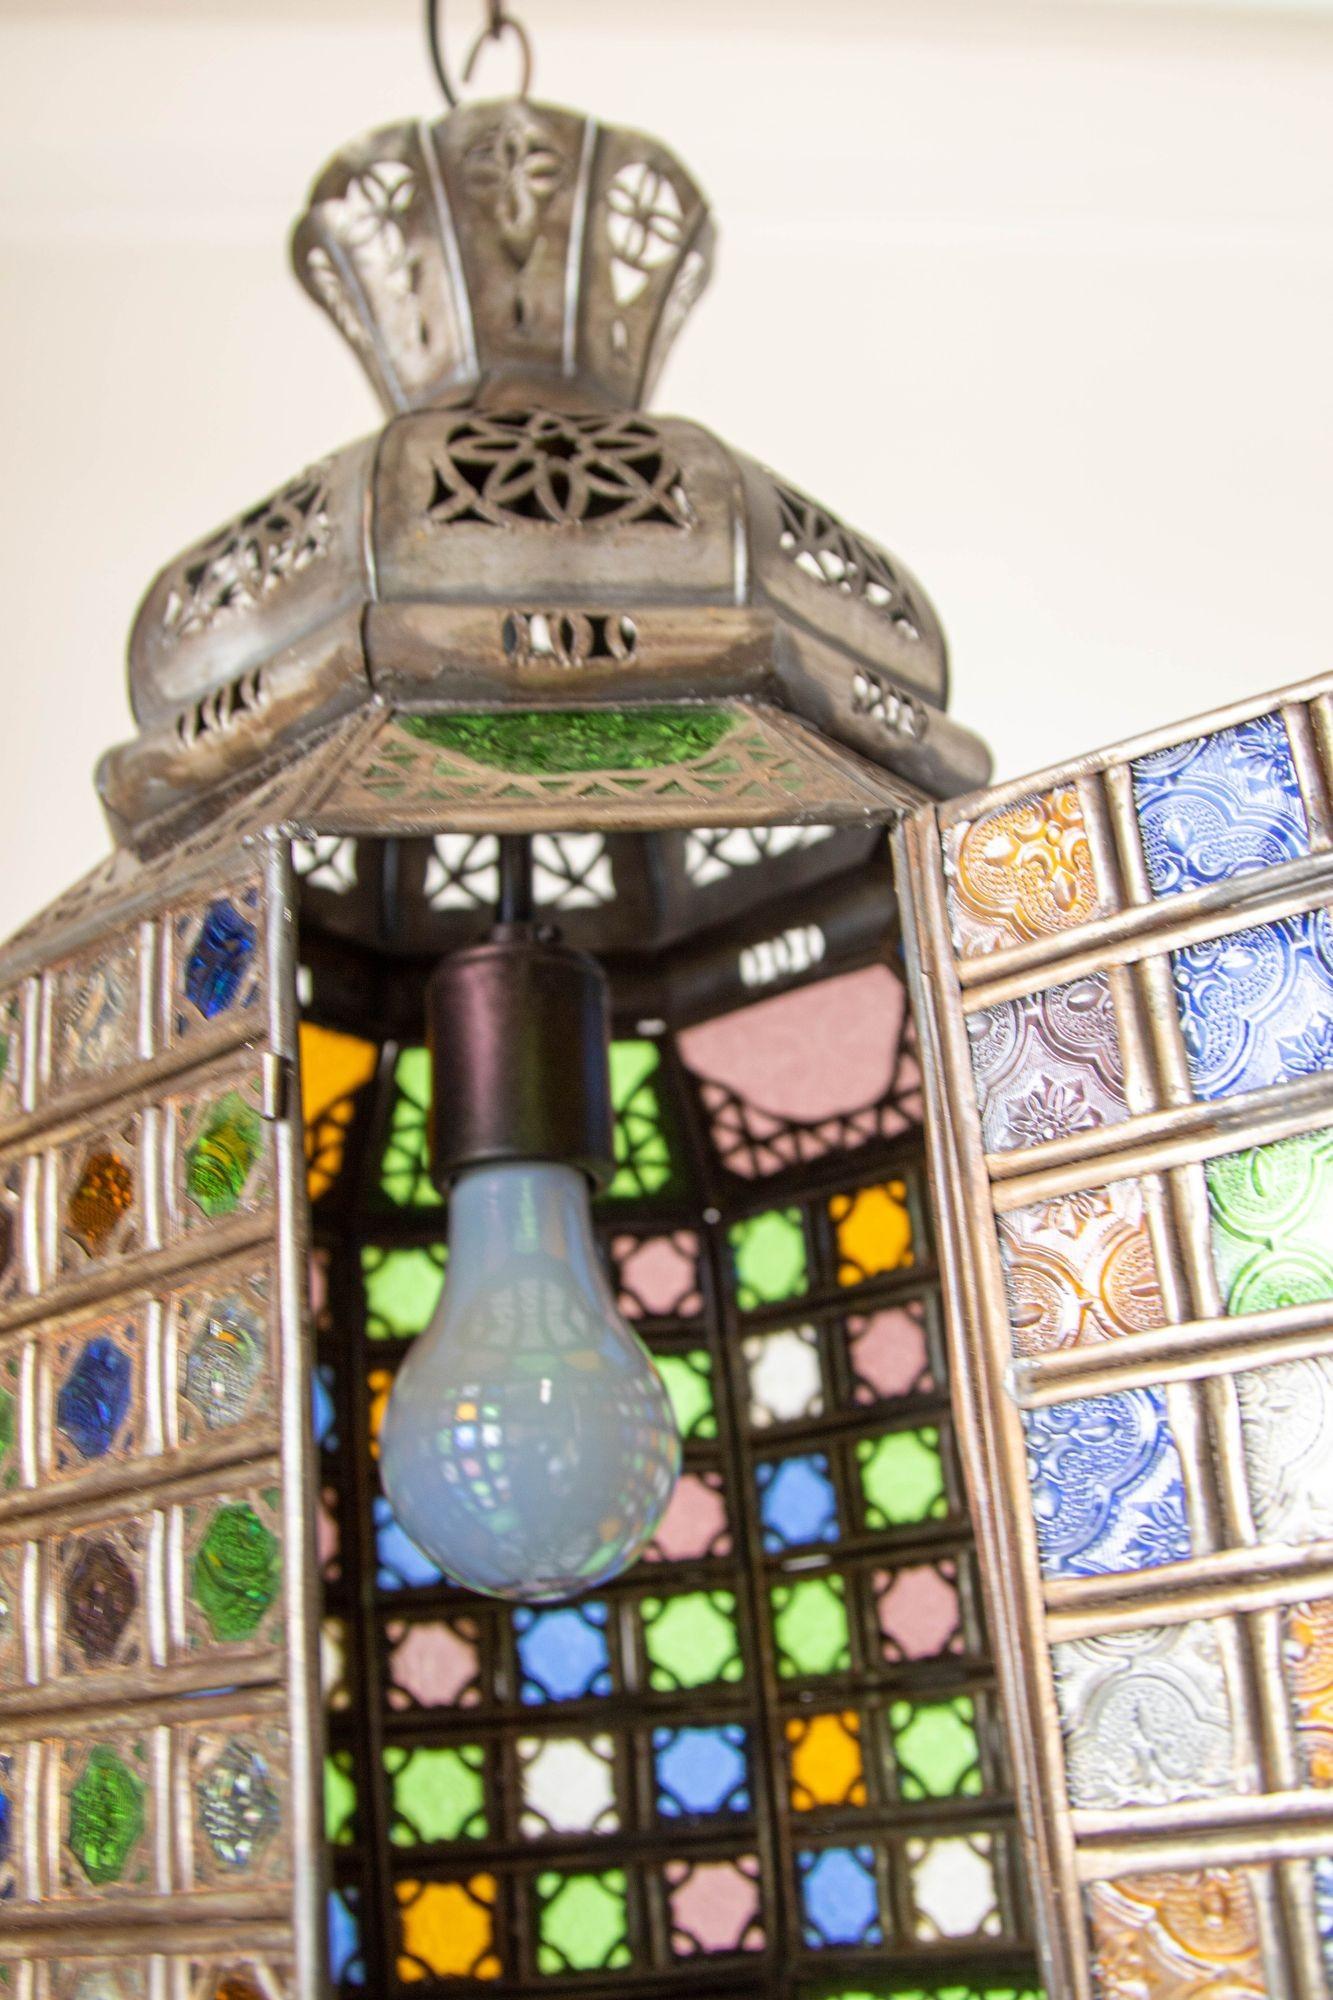 Blackened Moroccan Moorish Metal Light Fixture with Stained Glass